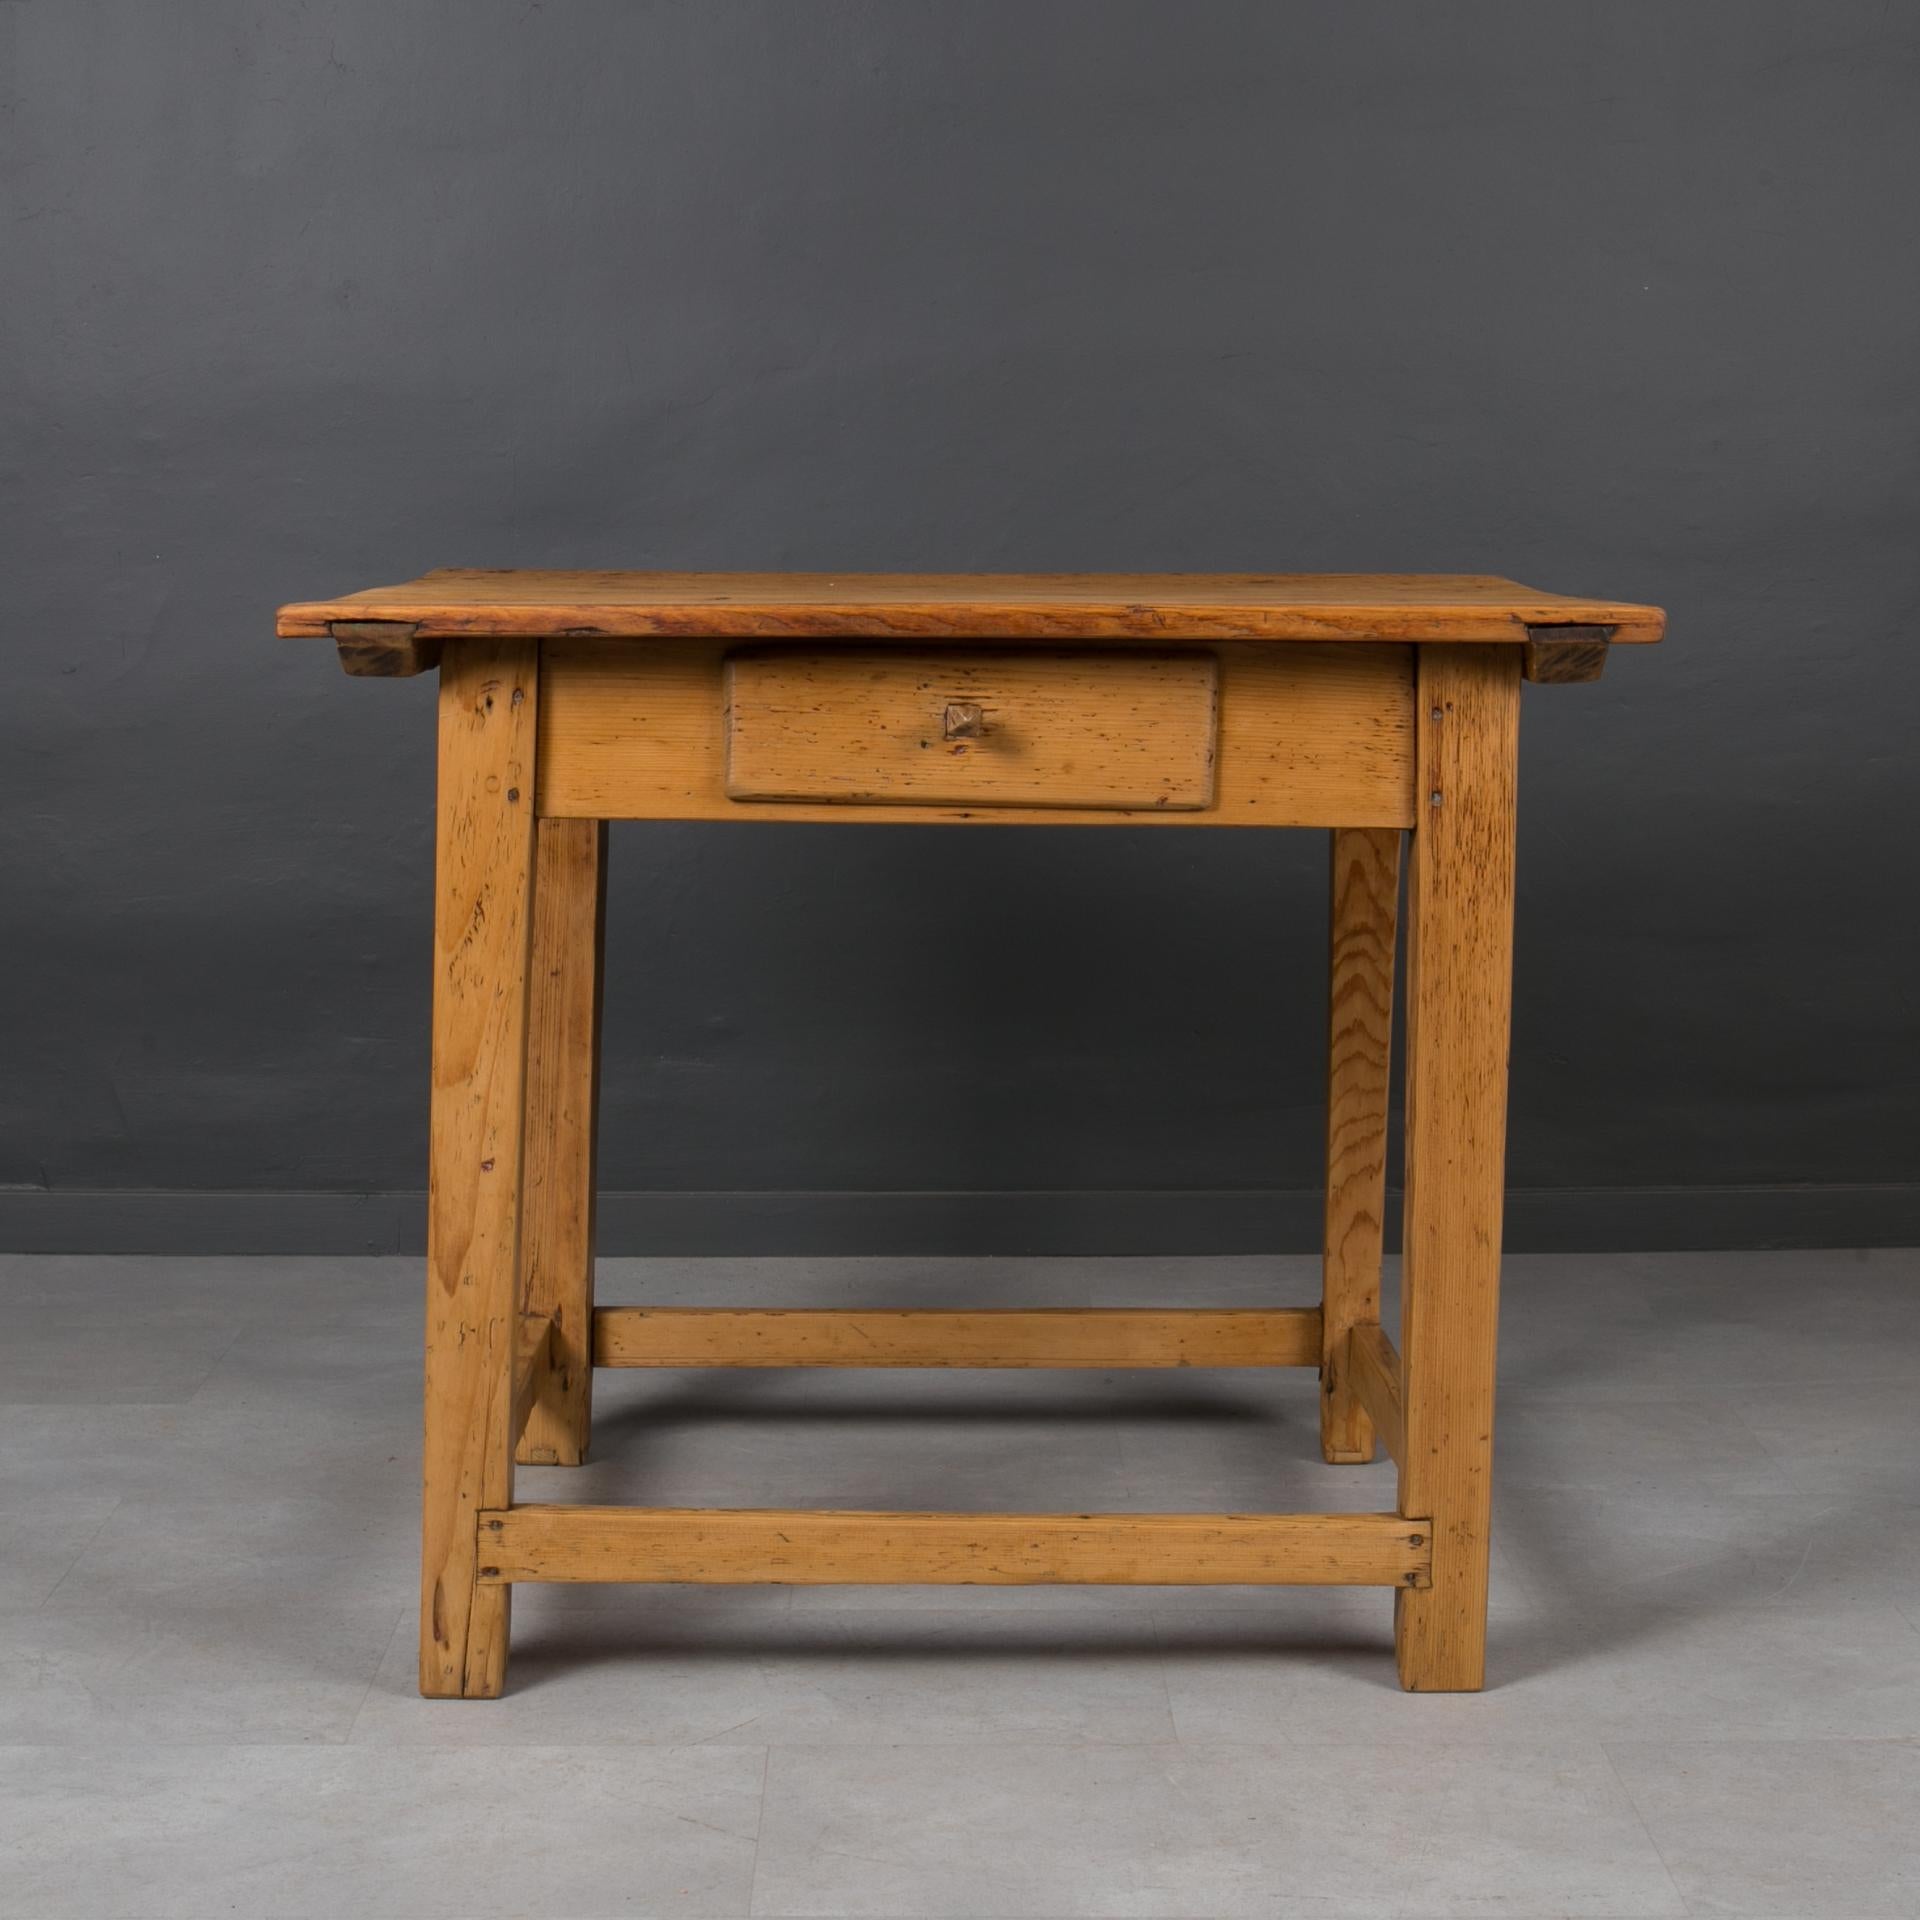 This charming vintage table was made in late 19th Century in Hungary. The whole piece is made of pine wood. The top is set on a solid base with a wide apron. One practical drawer resides in the apron. The piece was gently refreshed and finished with